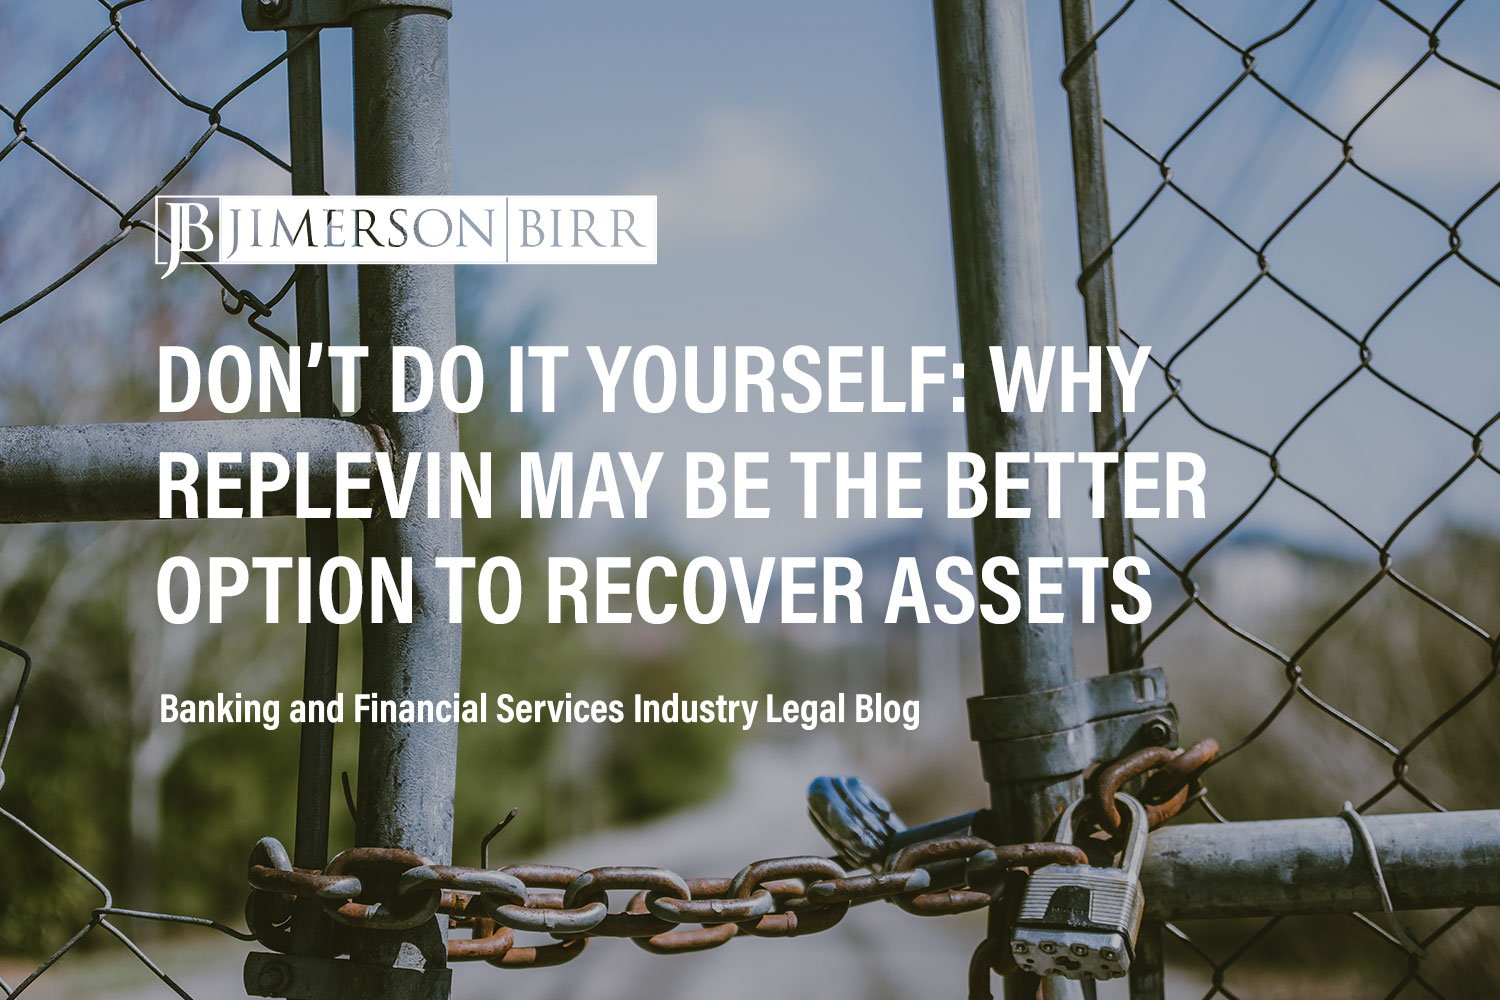 Recovering Personal Property Collateral: When Should Secured Creditors Consider Replevin Instead of Self-Help Repossession?